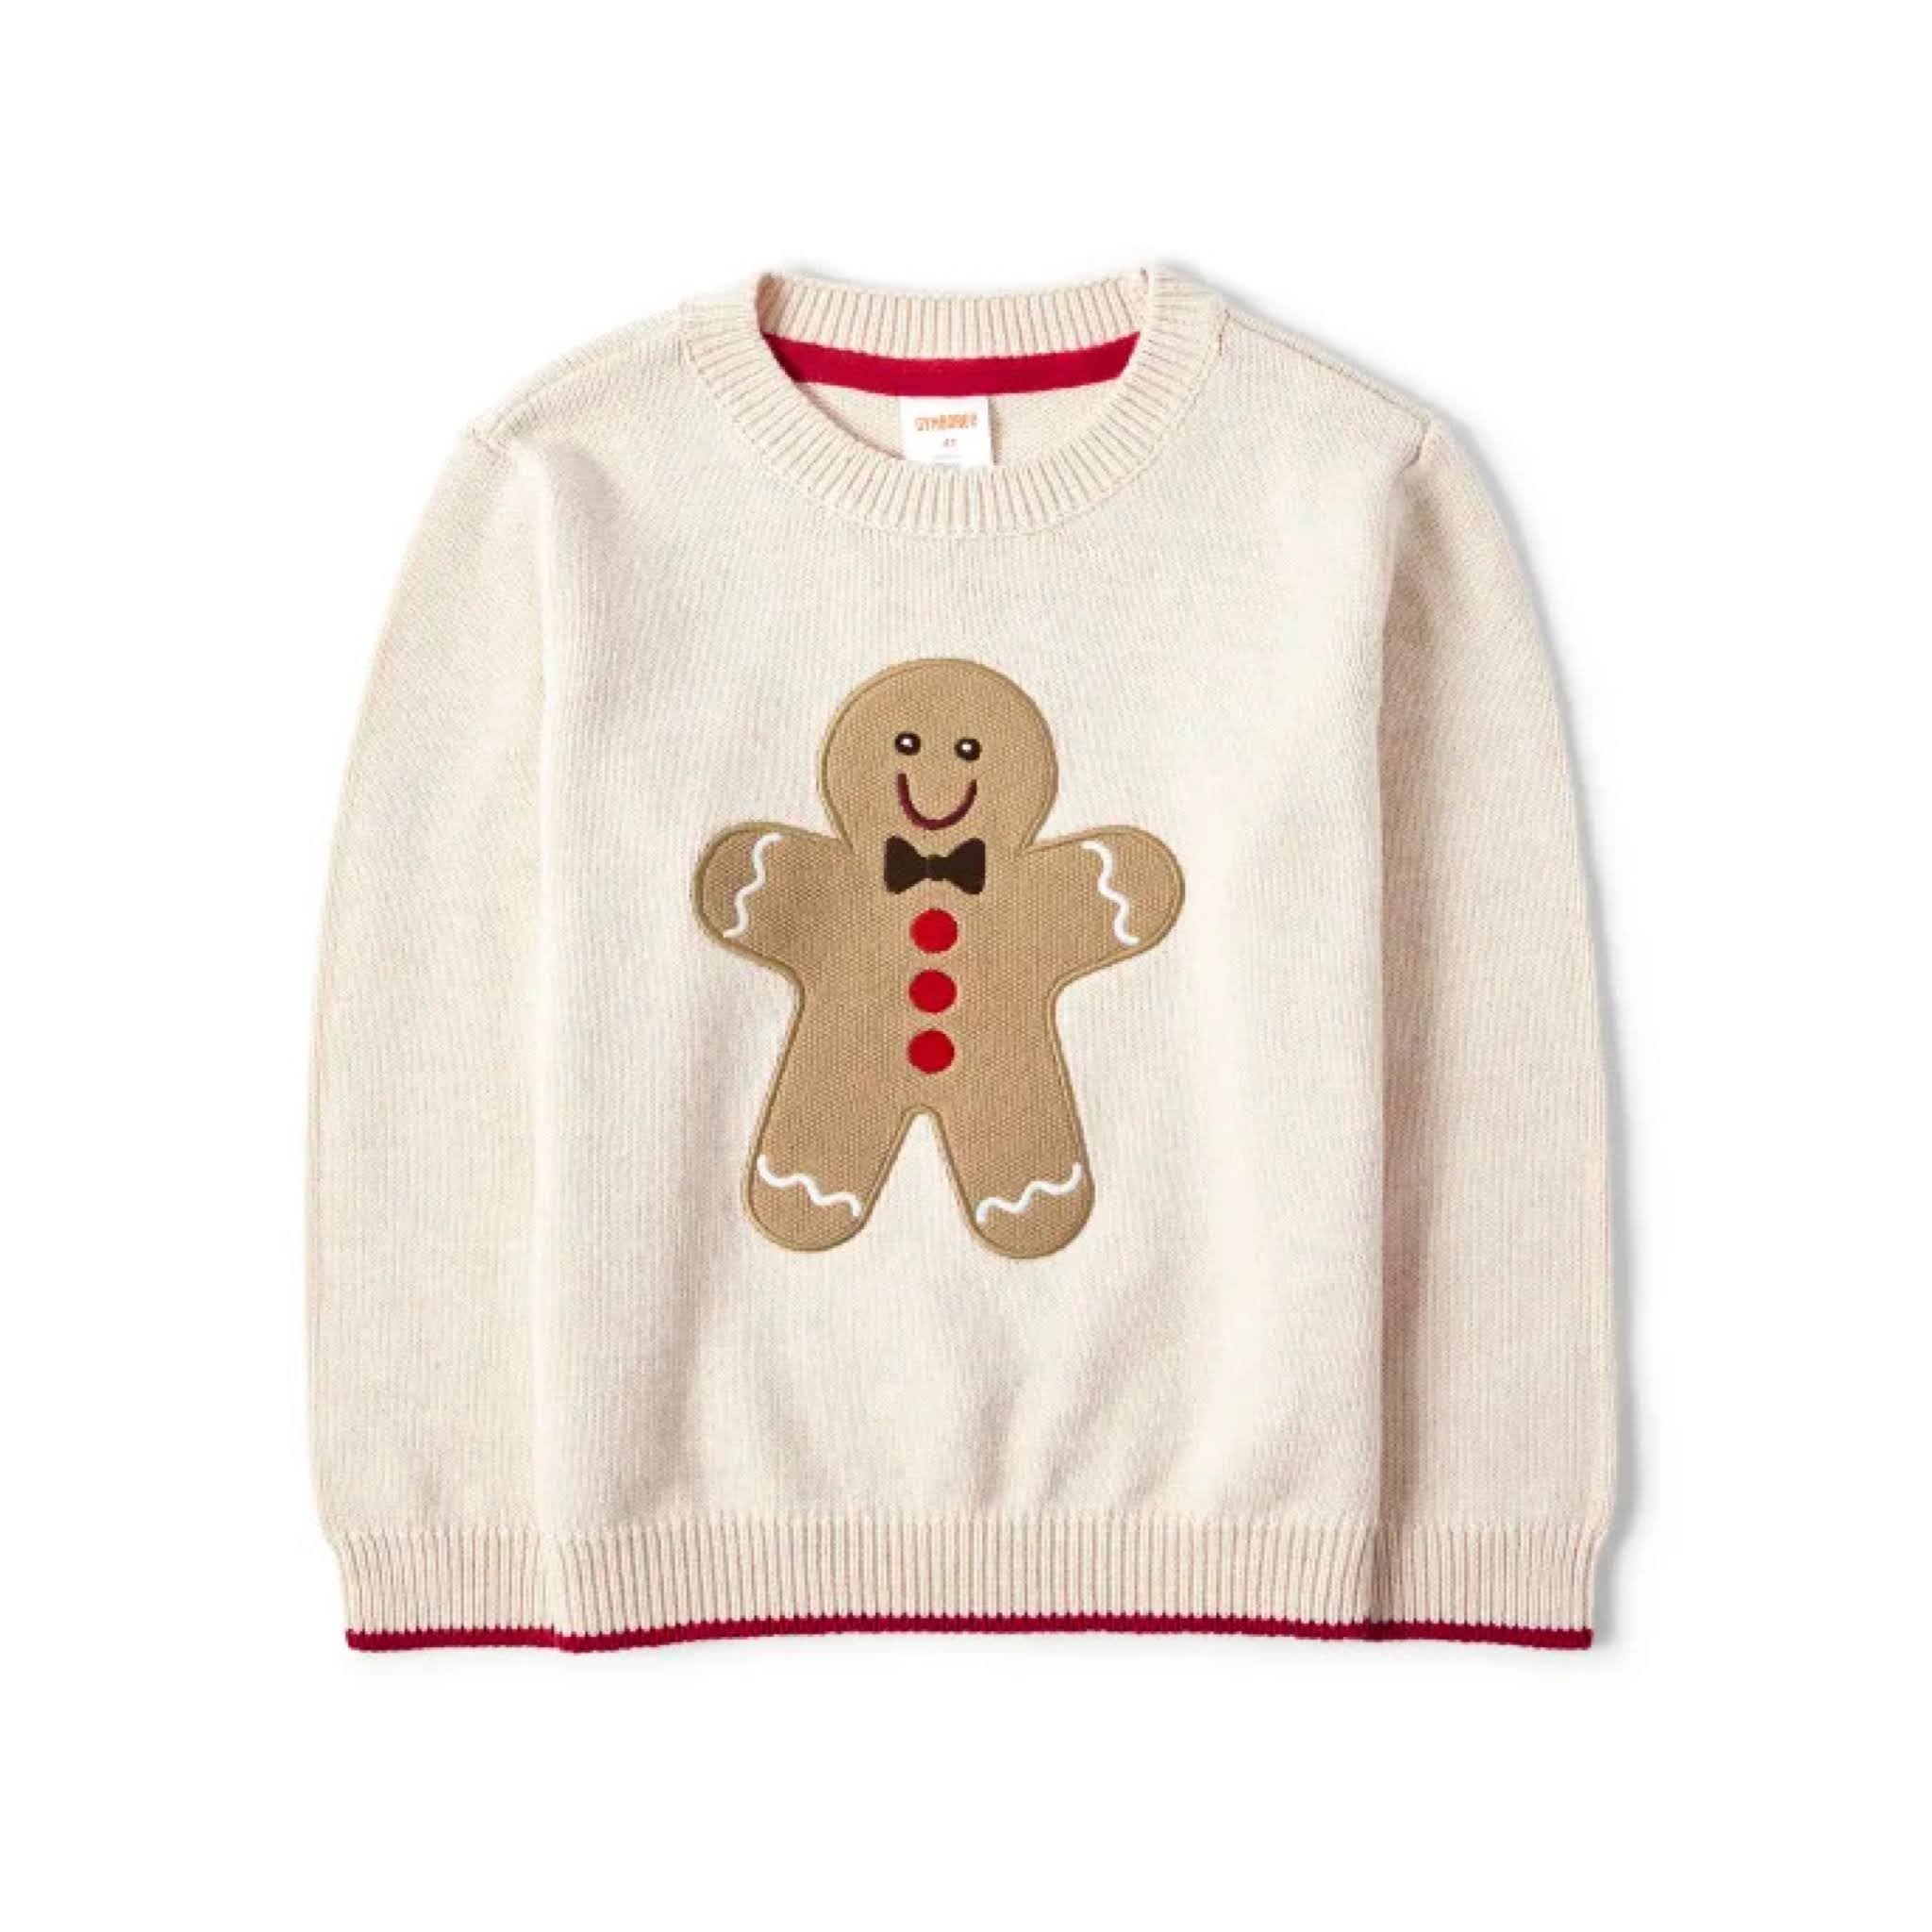 Kids Holiday Gingerbread Sweater from Gymboree